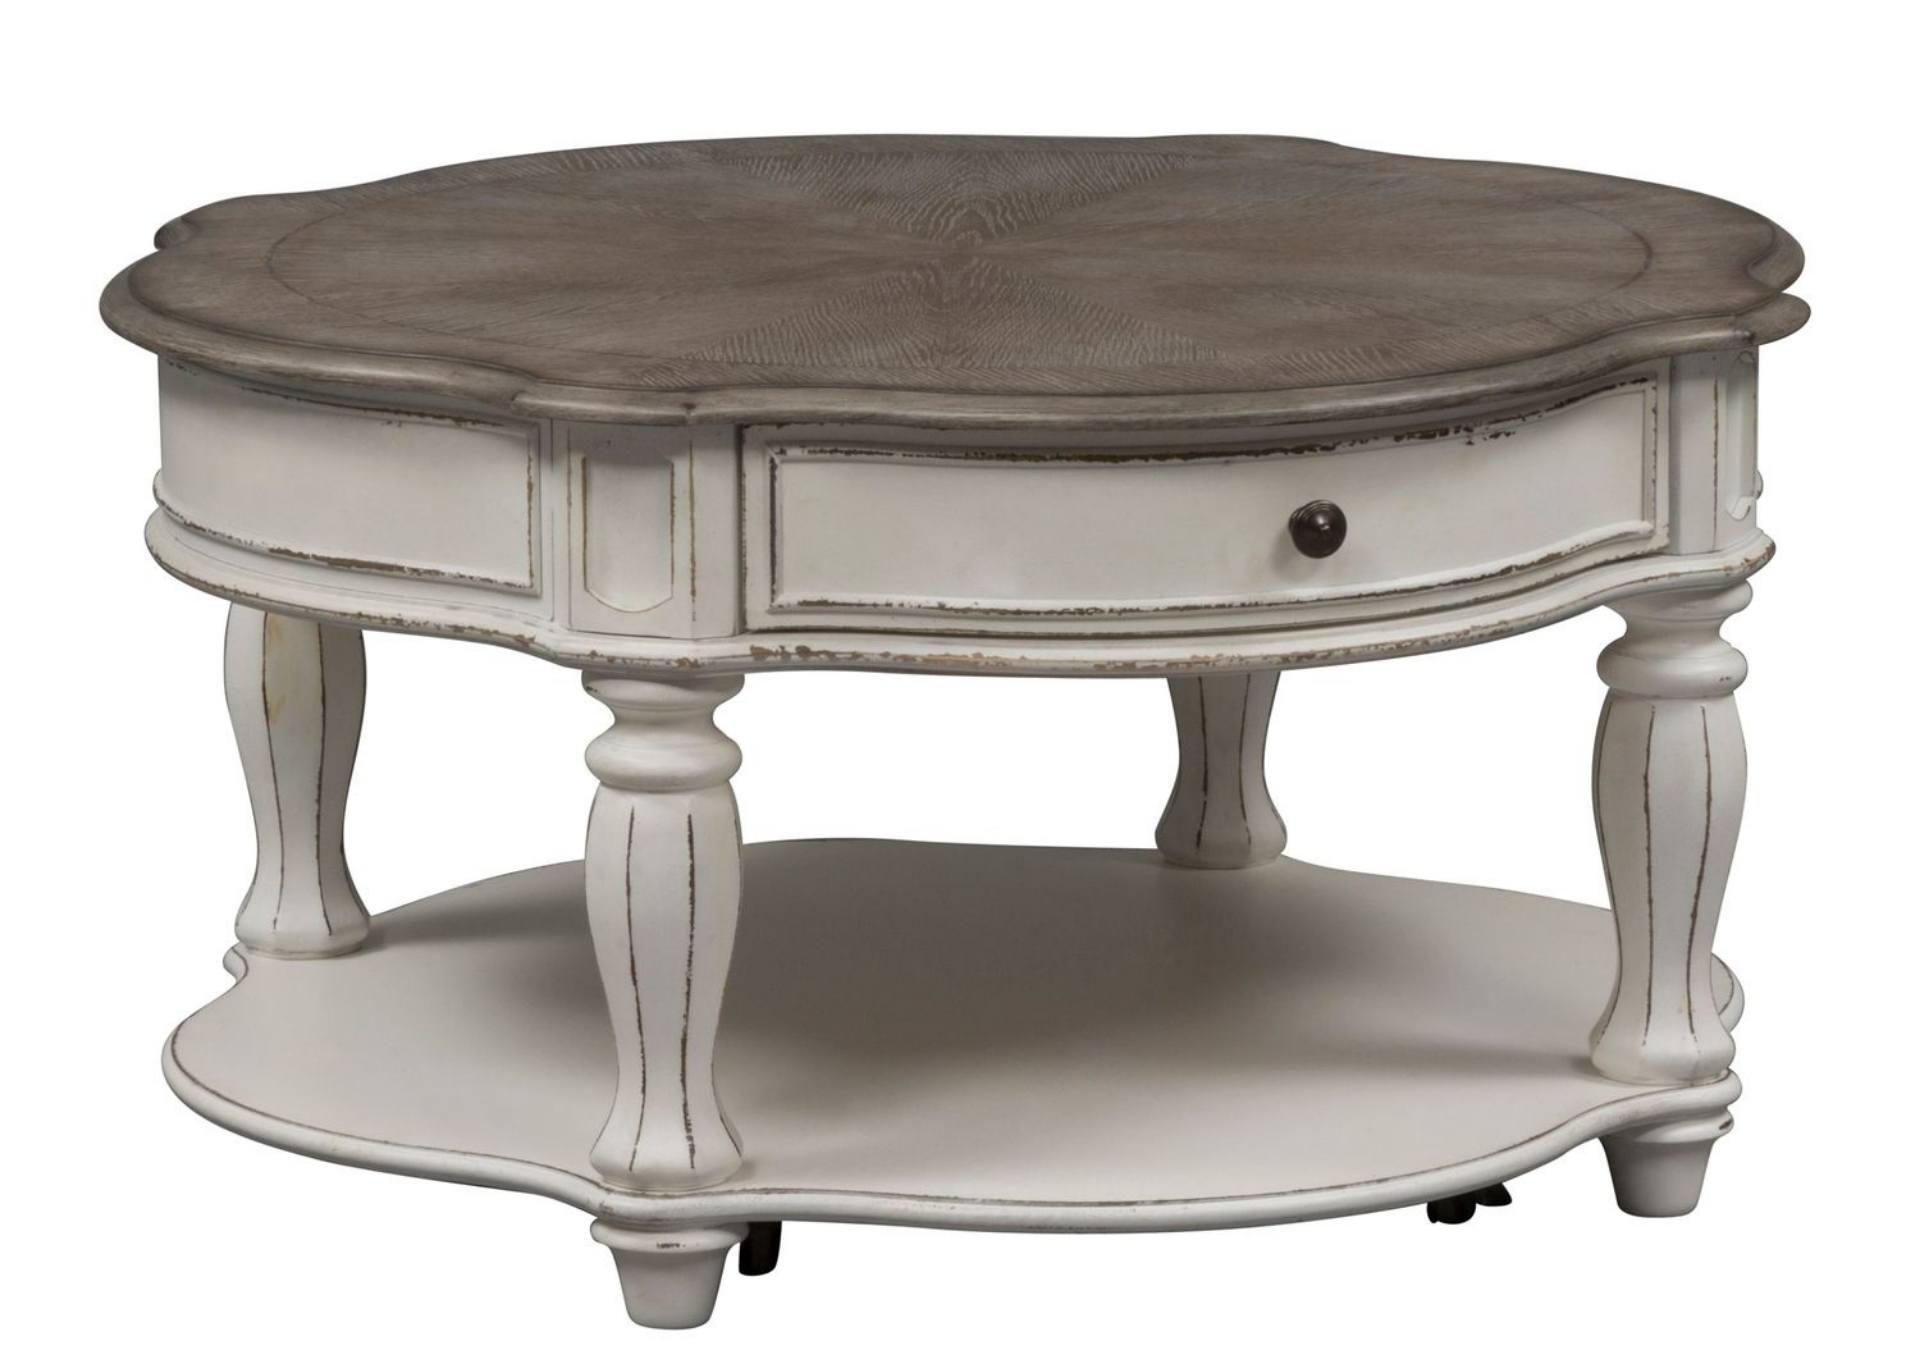 MAGNOLIA MANOR ROUND COCKTAIL TABLE,LIBERTY FURNITURE